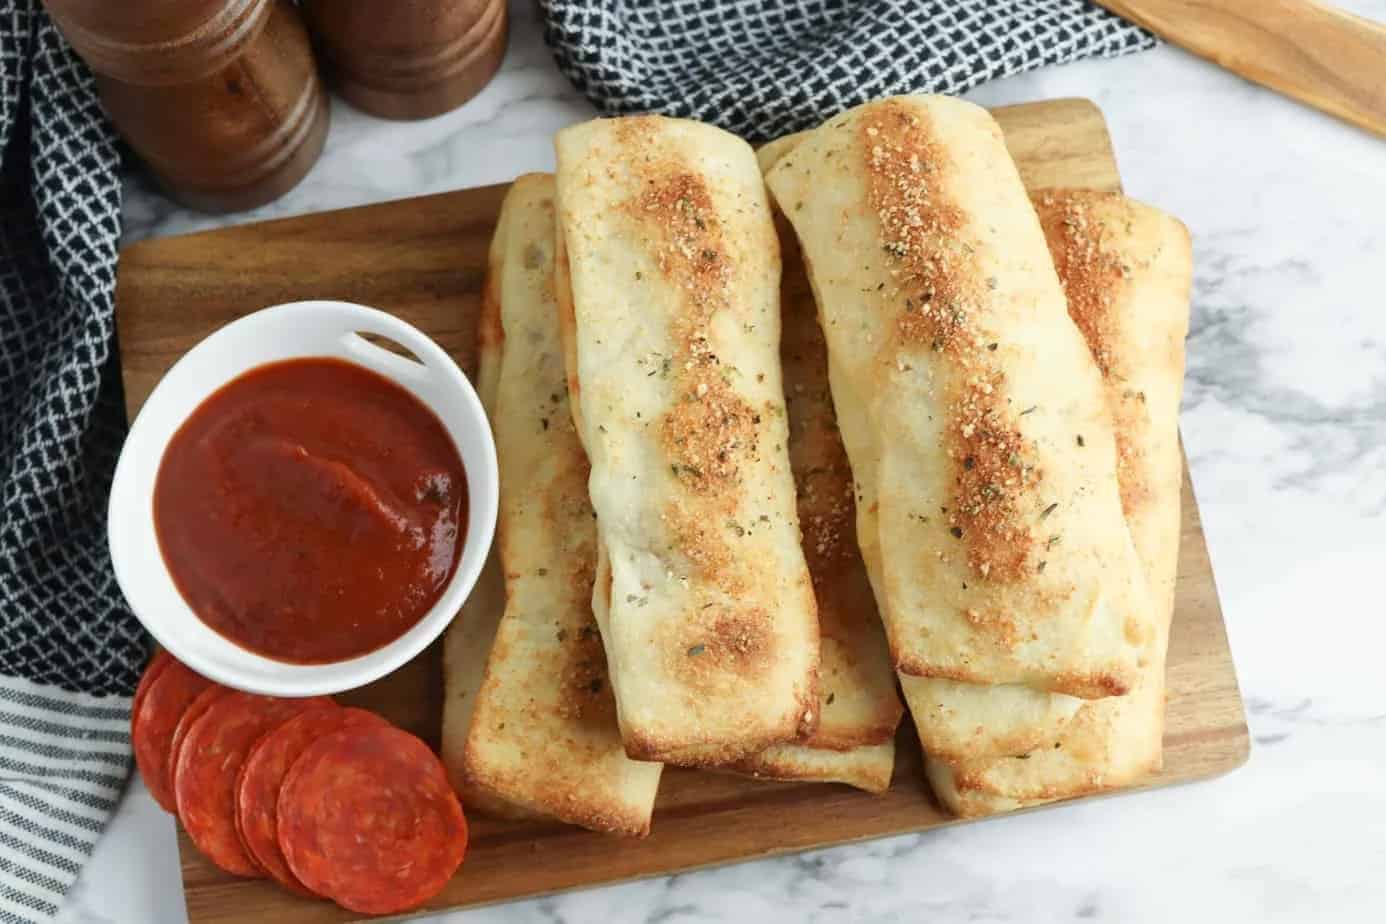 Breadsticks on a wooden server with pepperonis and marinara sauce.